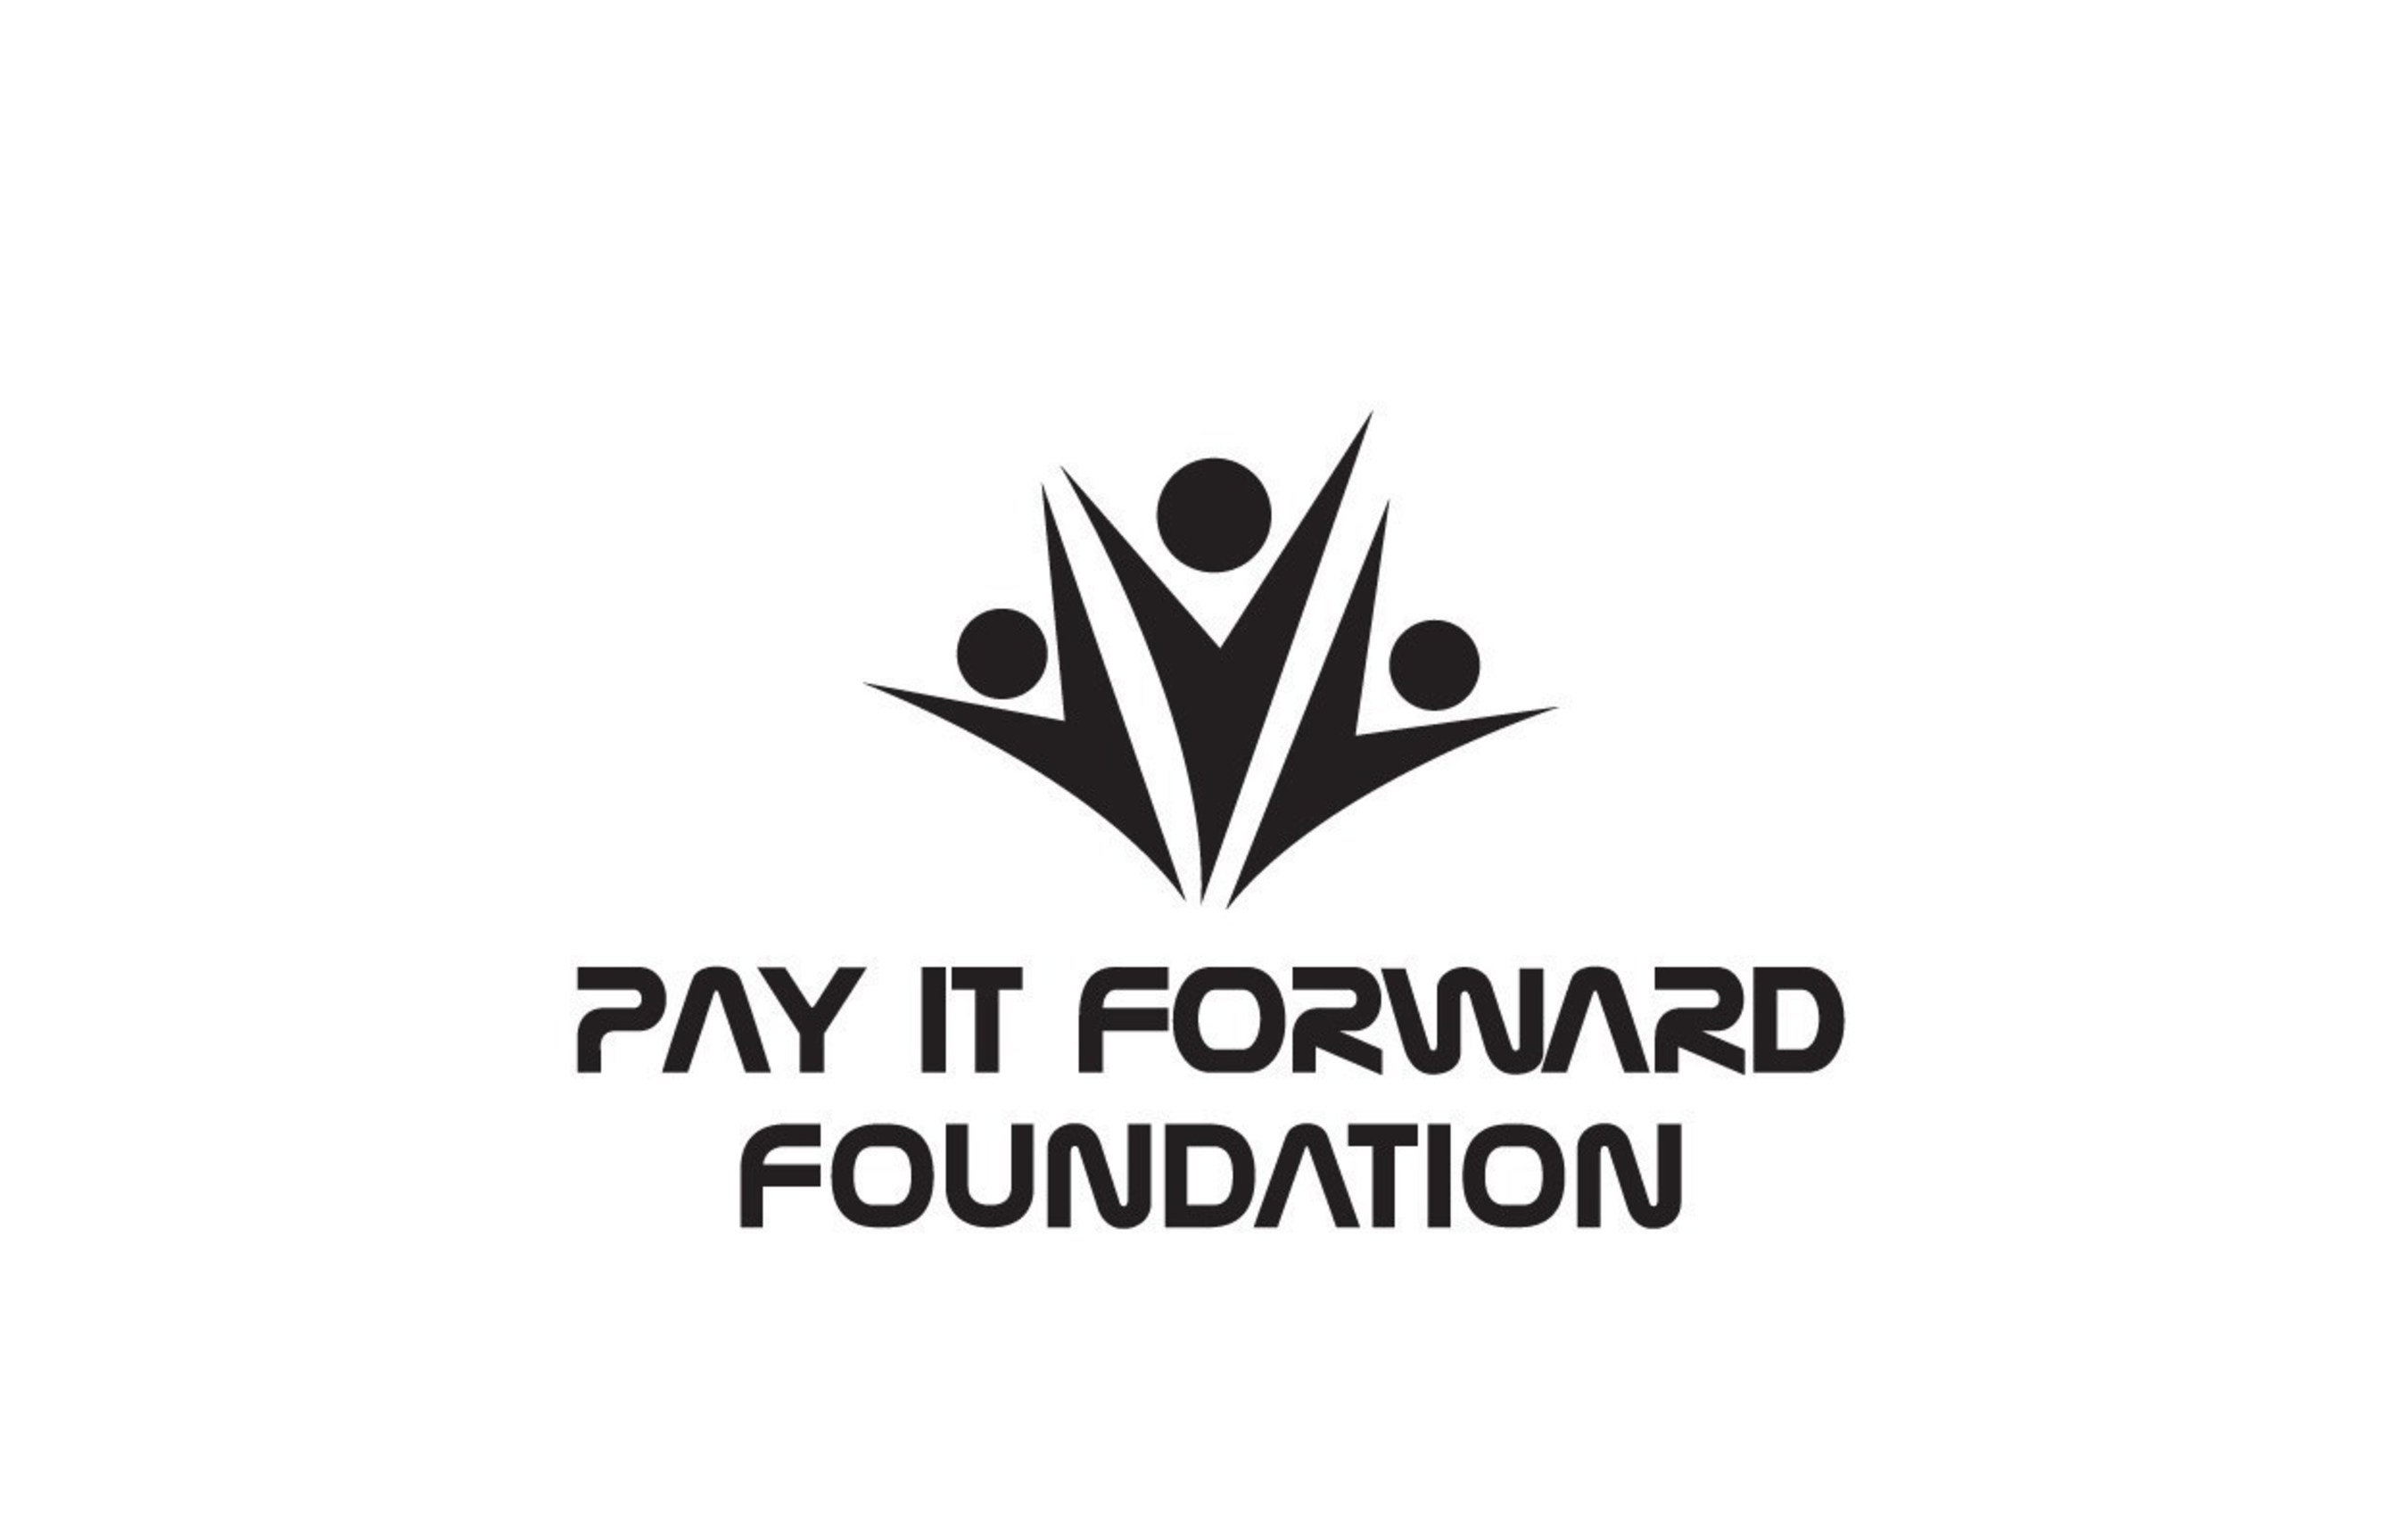 Learn more about International Pay It Forward Day or the Pay It Forward Foundation by visiting http://www.payitforwardfoundation.org/.